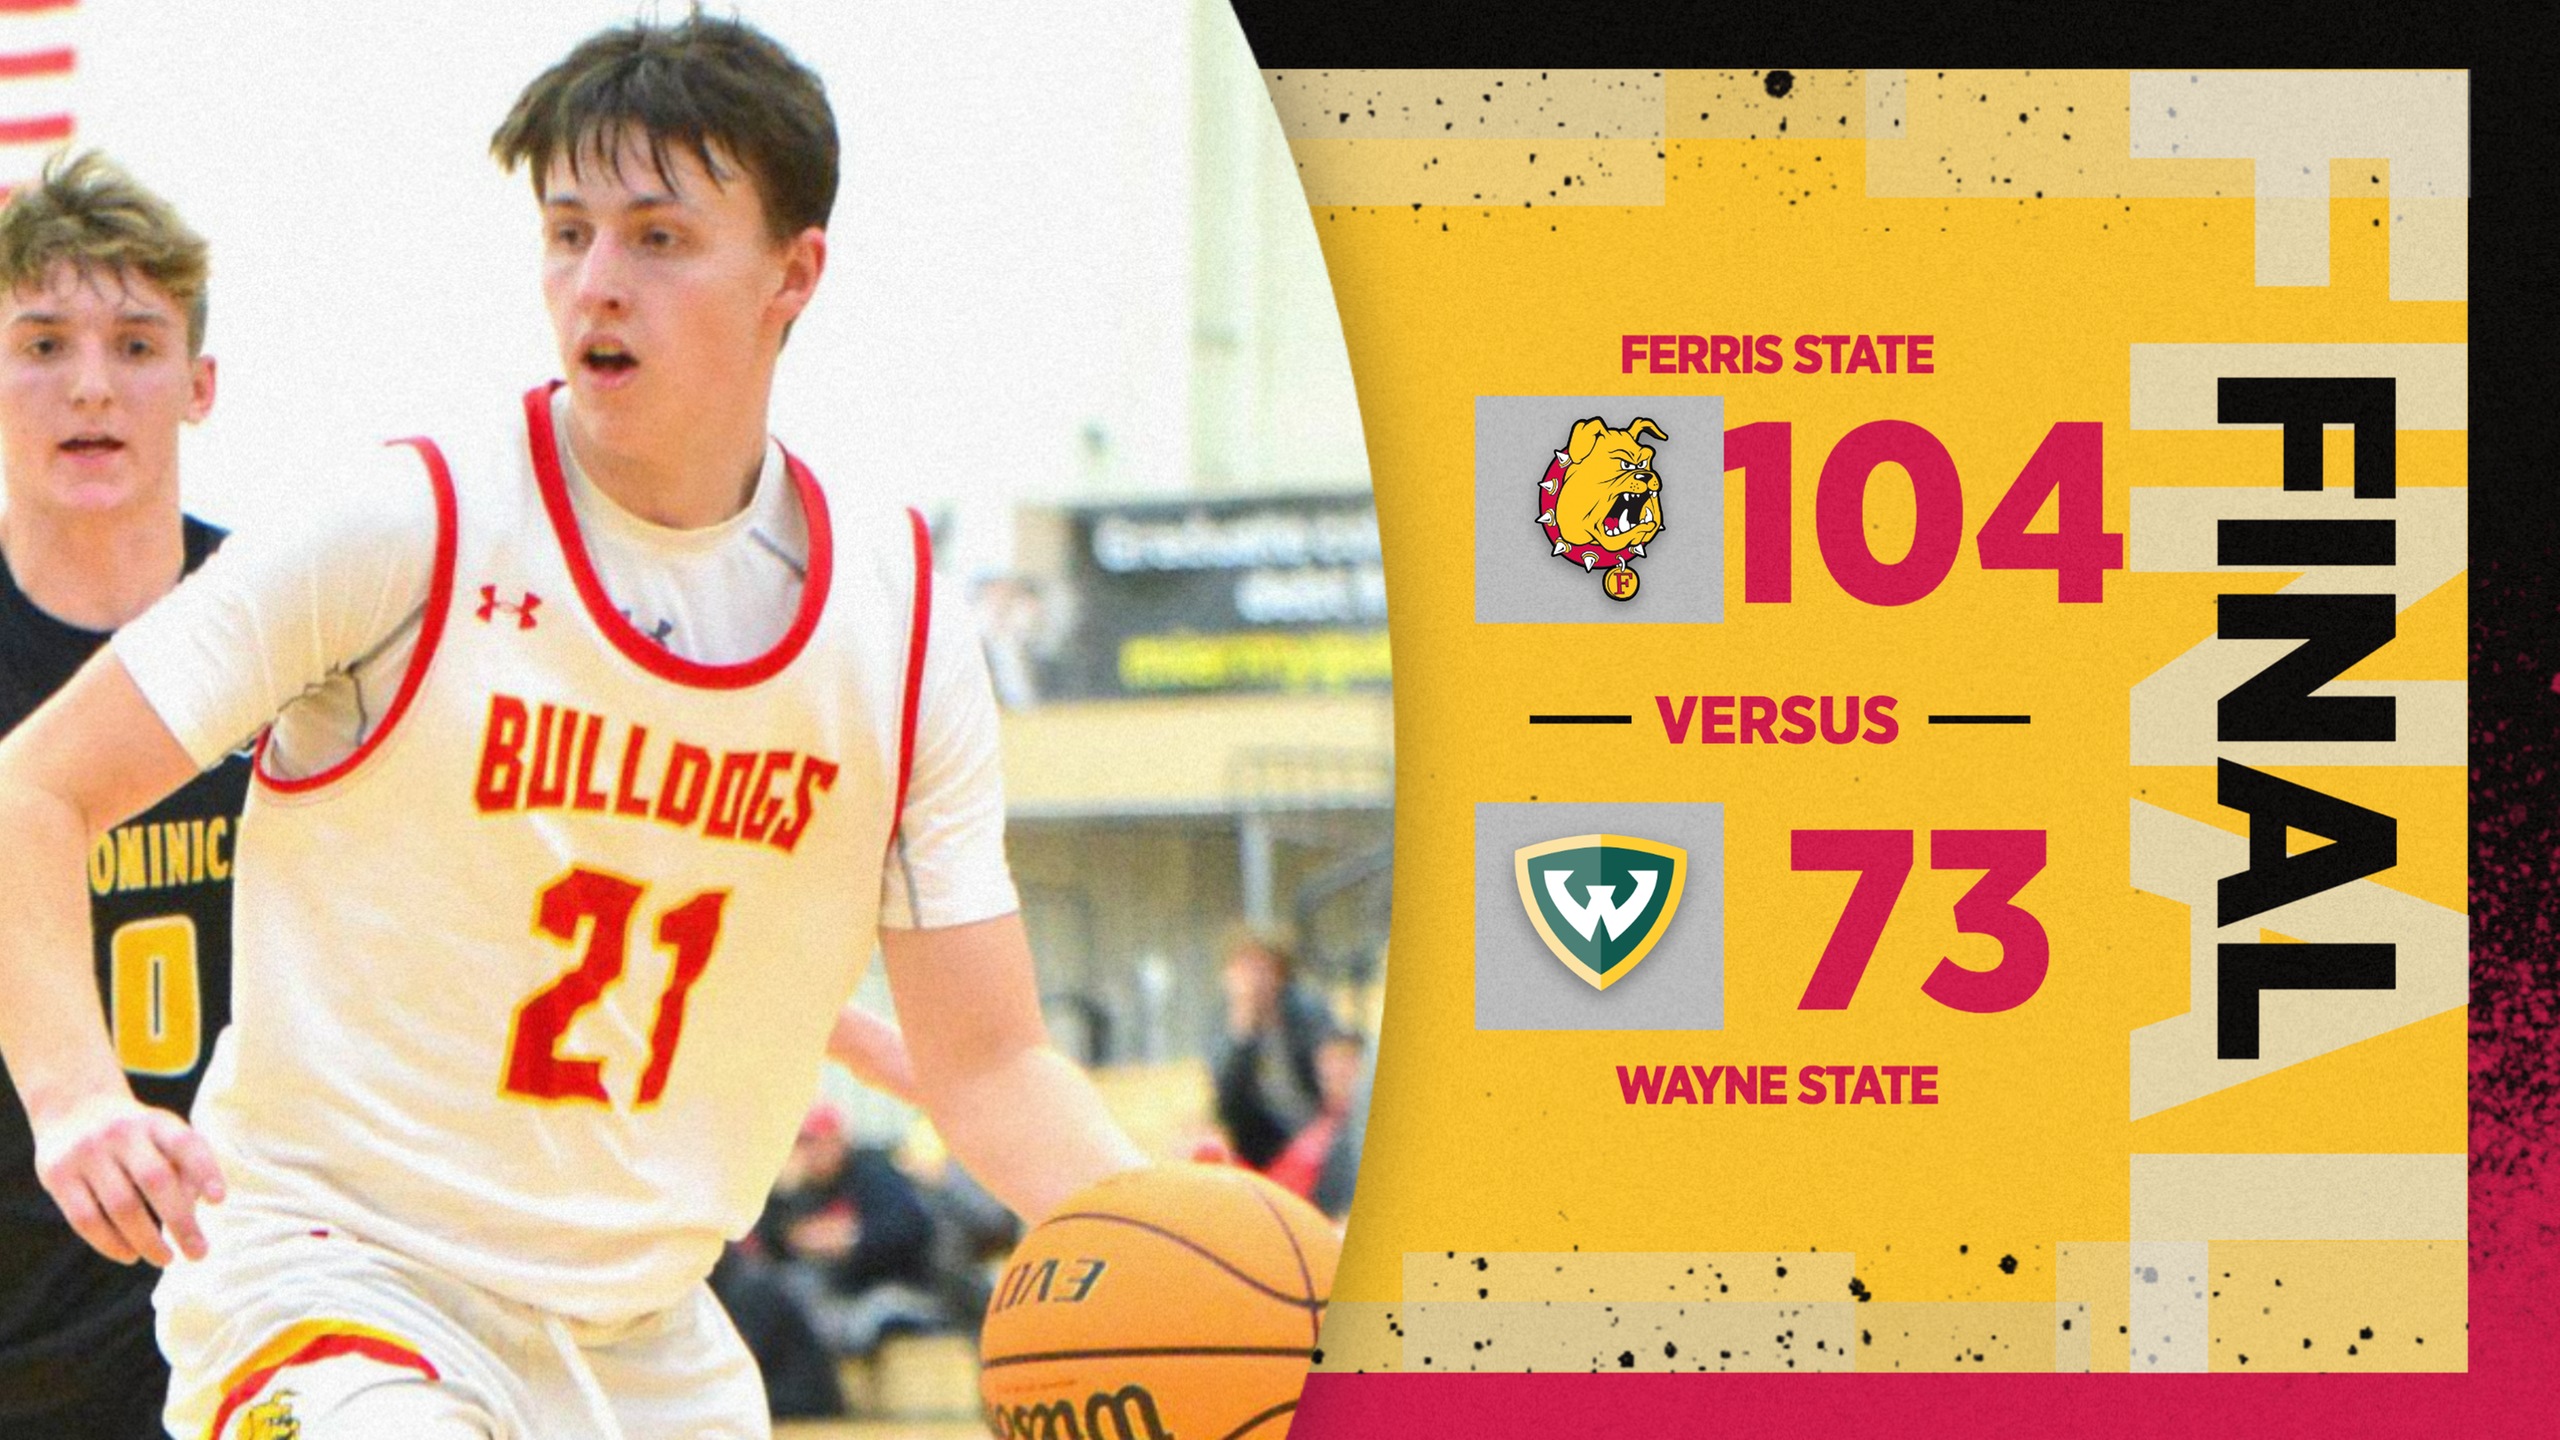 Ferris State Tops The Century Mark To Stay Perfect In The GLIAC With Big Monday Win